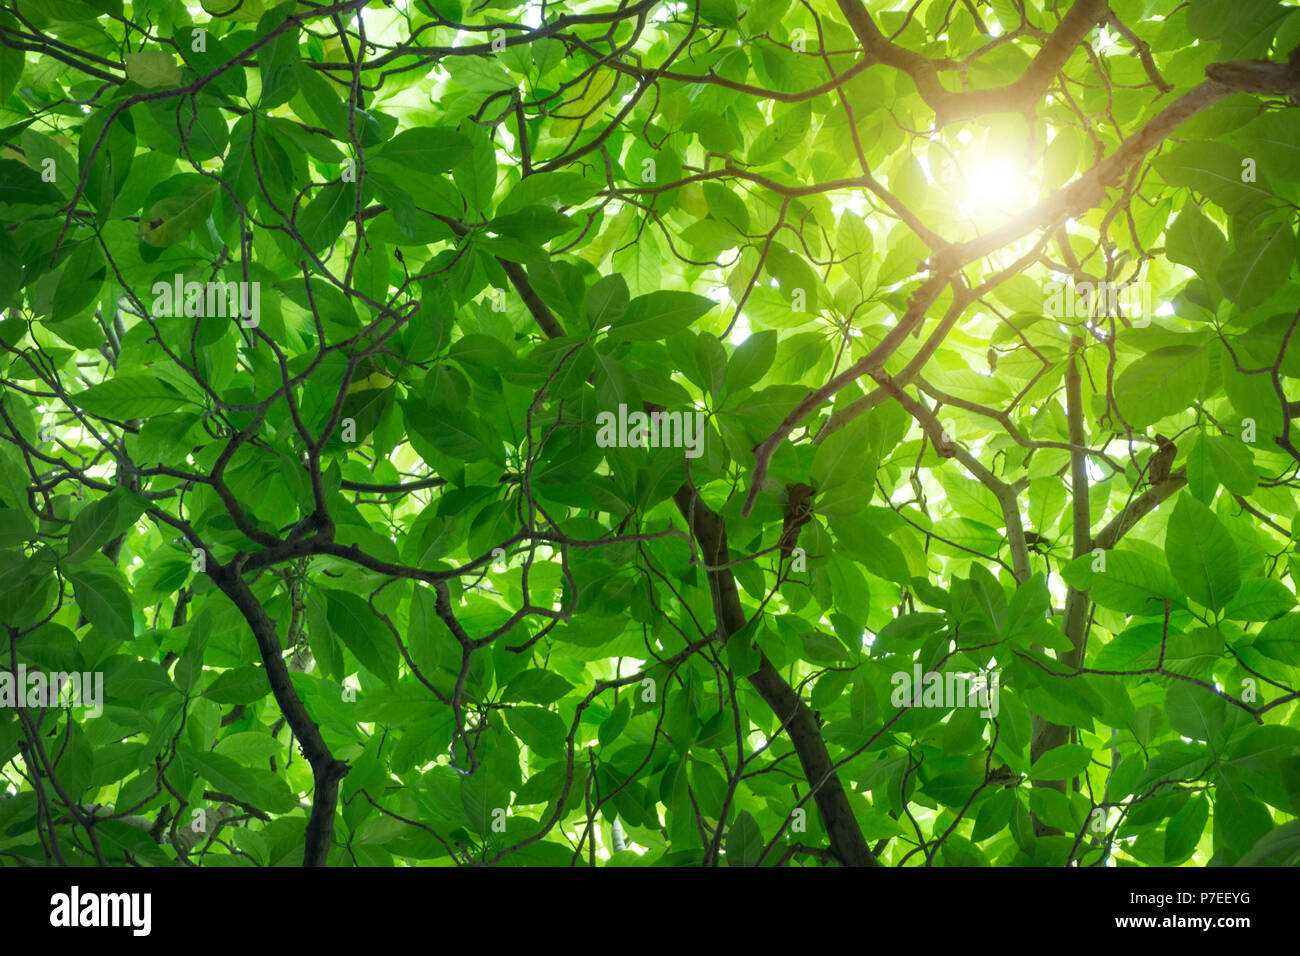 Green Cananga odorata tree, known as the cananga tree is a tropical tree that originates in Indonesia, which in early 19th century spread to Malaysia  Stock Photo